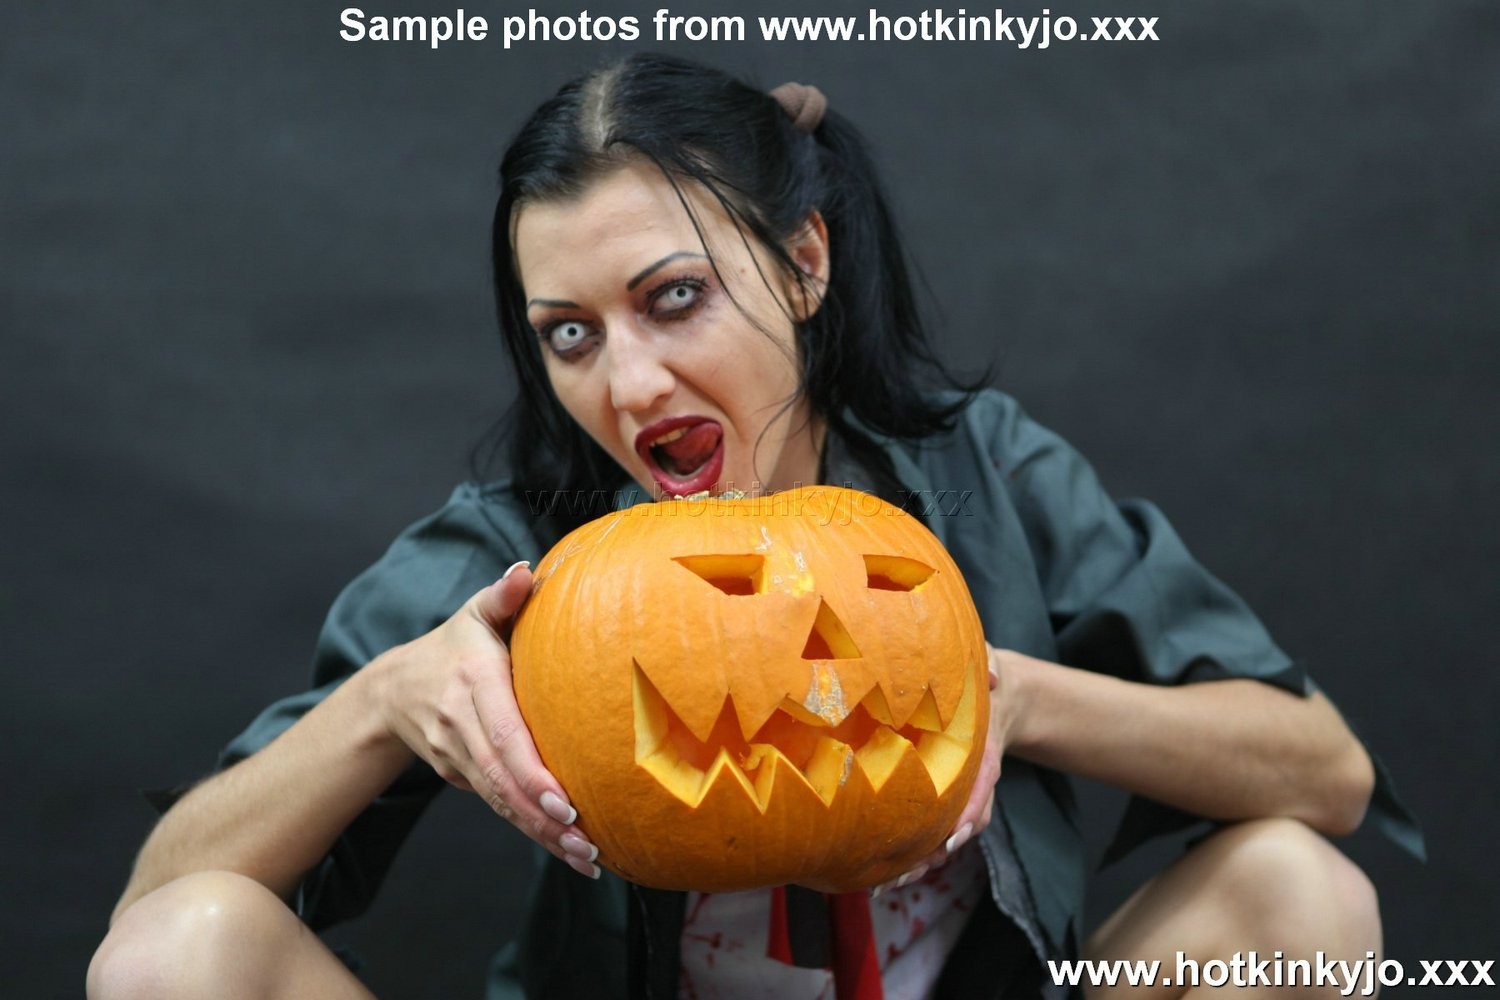 HotKinkyJo in halloween costume inserts toy into ass #68665512